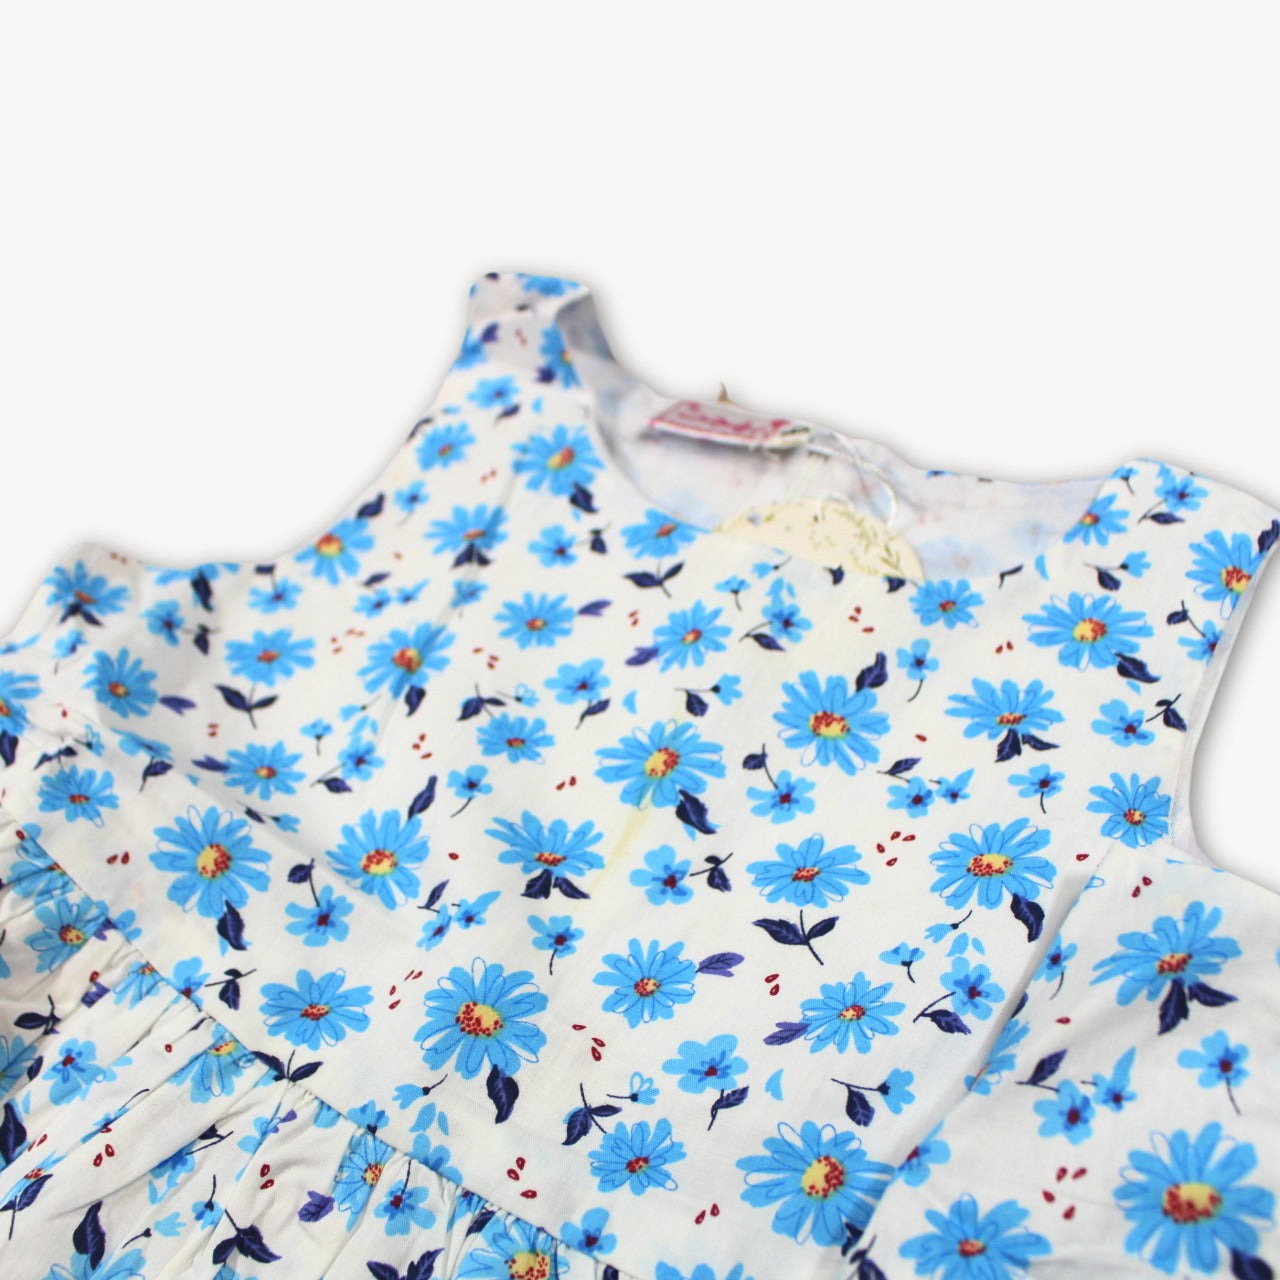 White & Blue Sunflower Summer Printed Cotton Frock